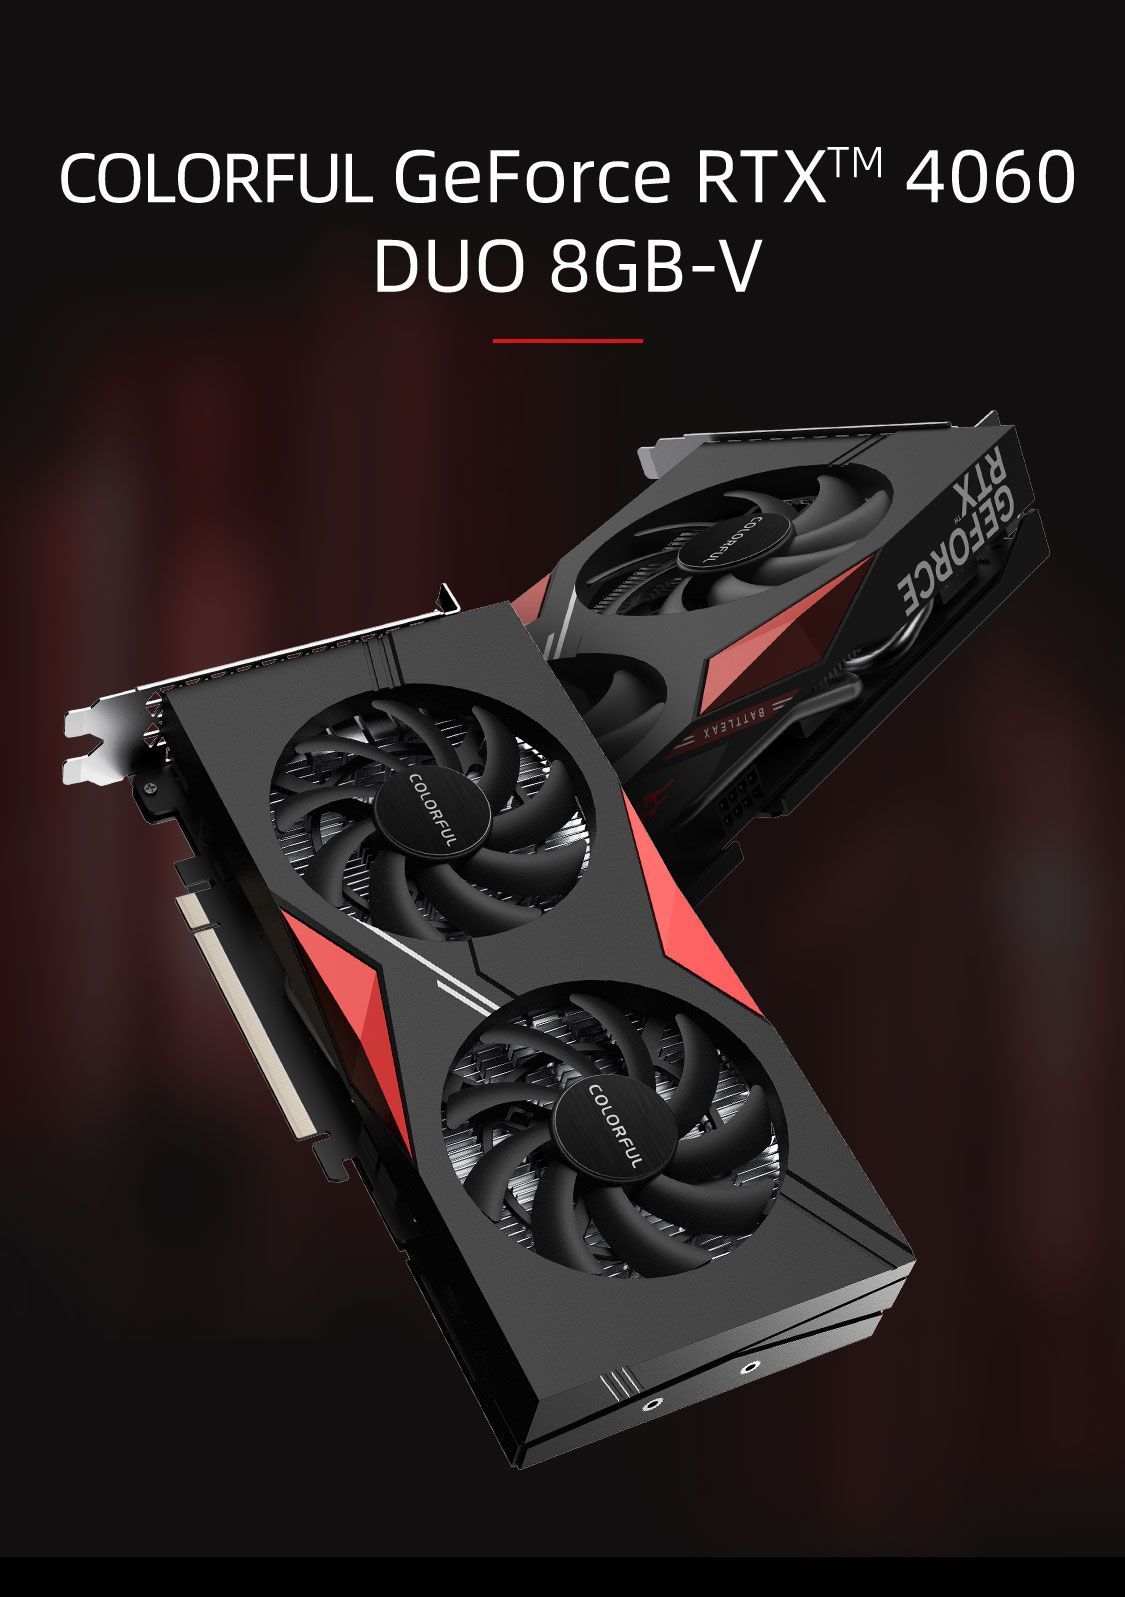 Colorful ultra duo 4060. Colorful GEFORCE RTX 4060 8 ГБ. Colorful видеокарта GEFORCE RTX 4060 8 ГБ (RTX 4060 Ultra w Duo OC 8gb). Colorful GEFORCE RTX 4060 8 ГБ Mini. Видеокарта в ДНР.